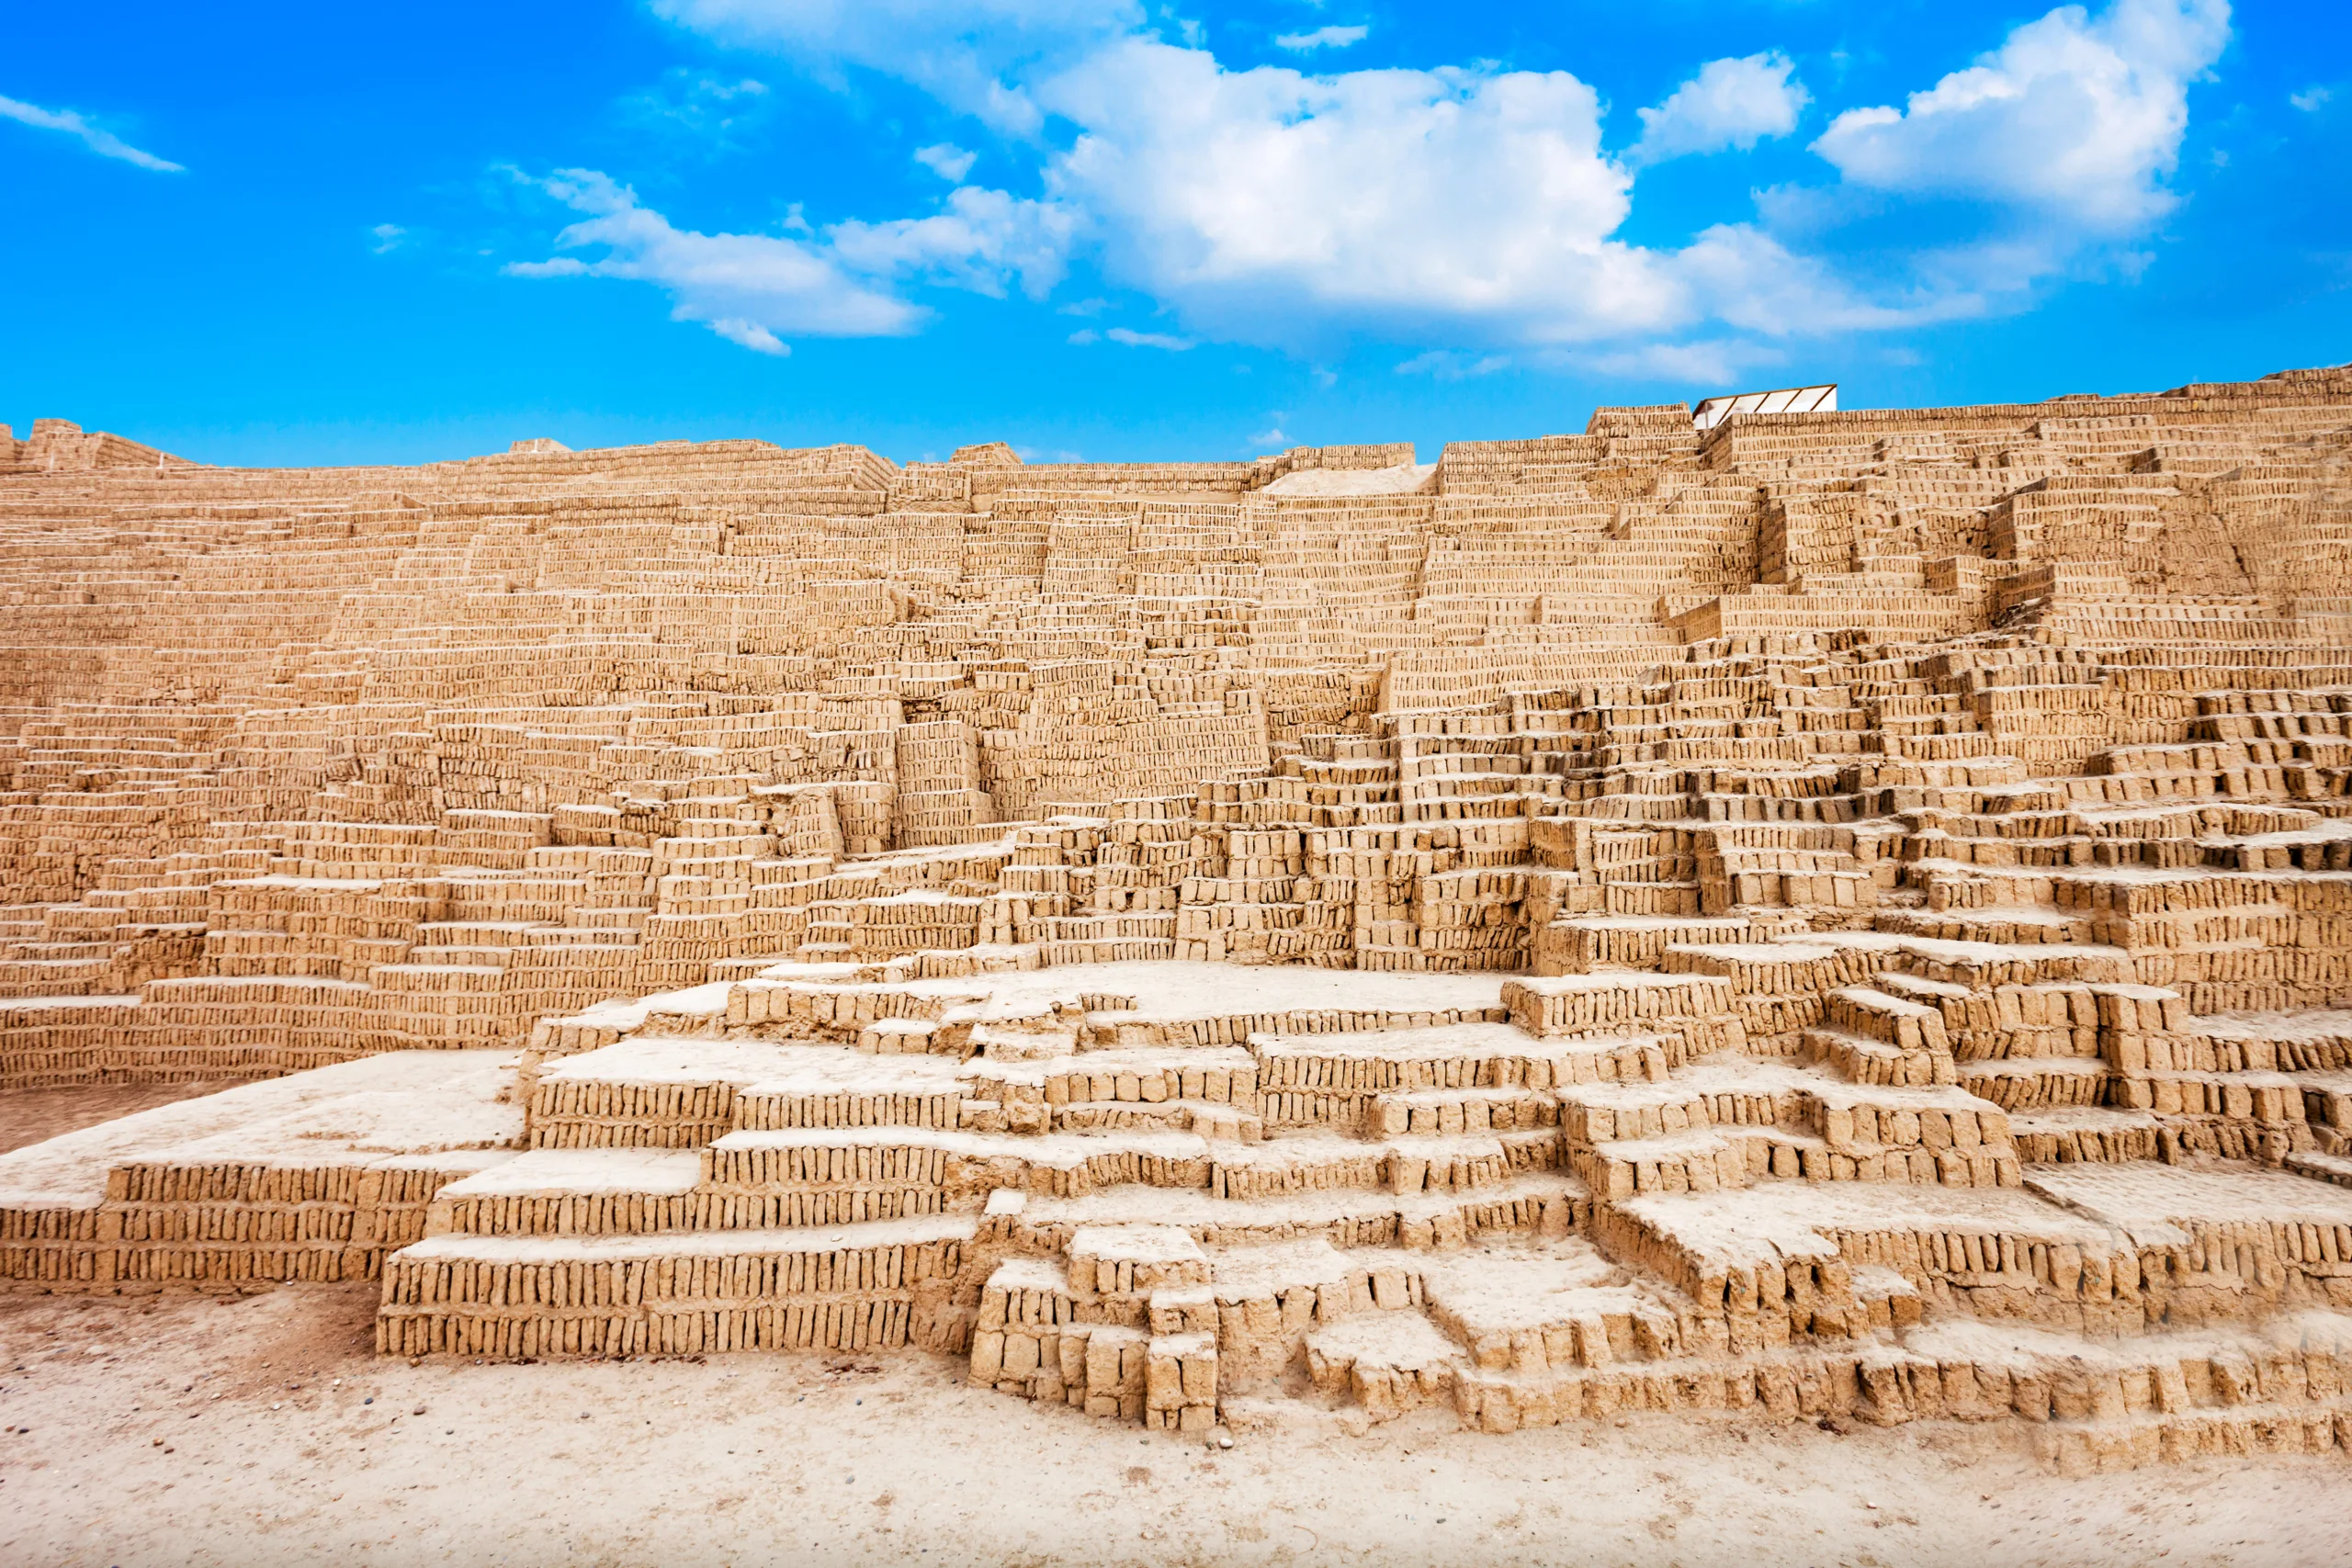 The Huaca Pucllana In The Miraflores District Of Lima, Peru